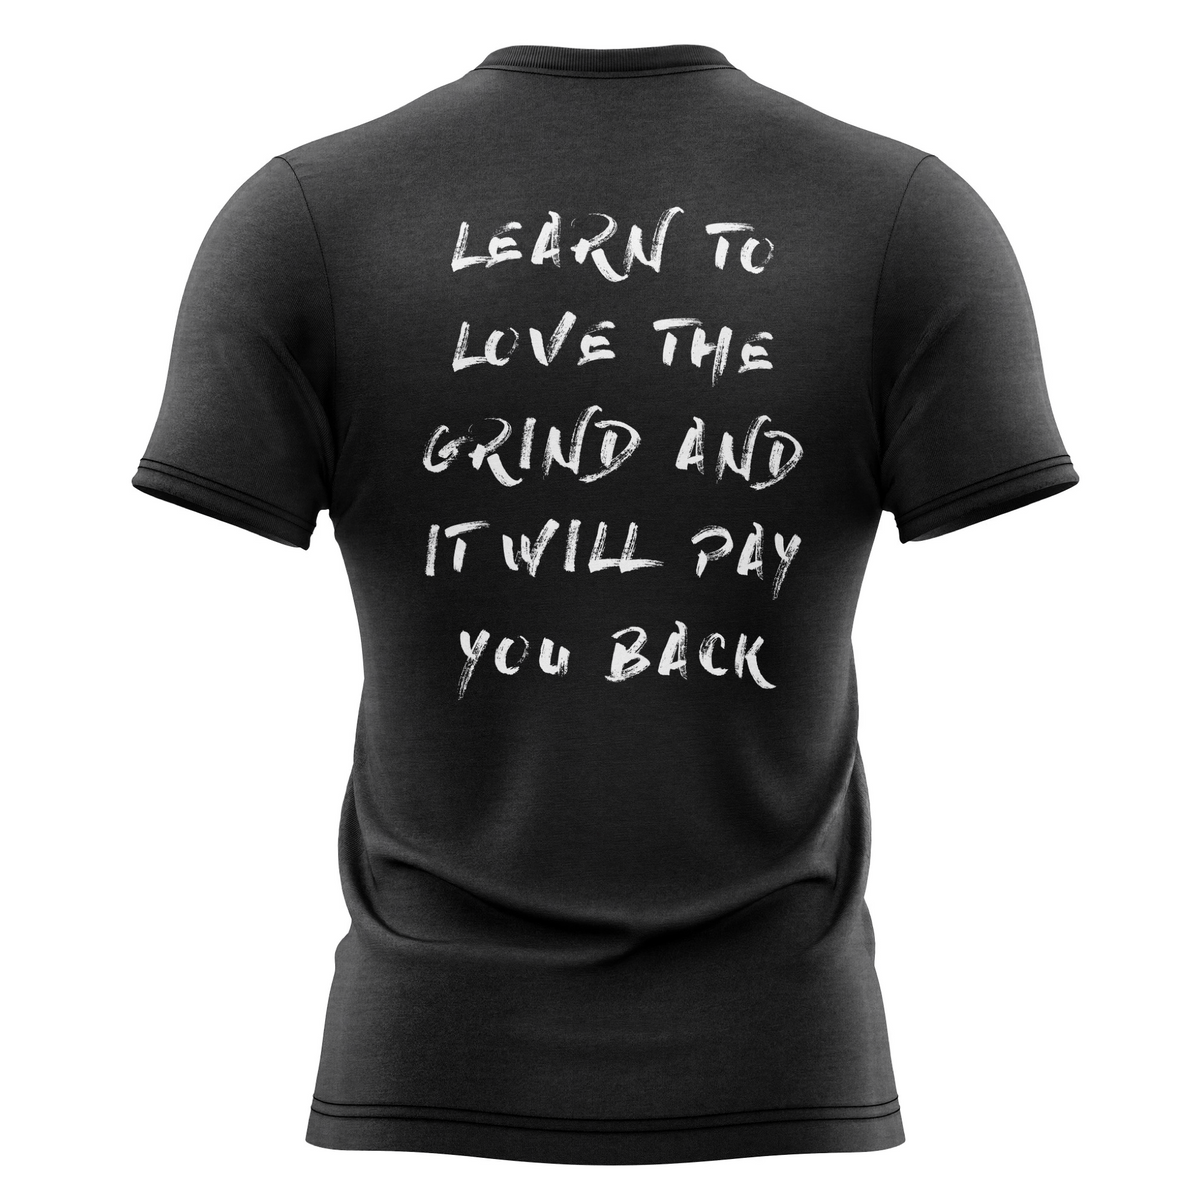 Learn To Love the Grind And It Will Pay You Back T-Shirt